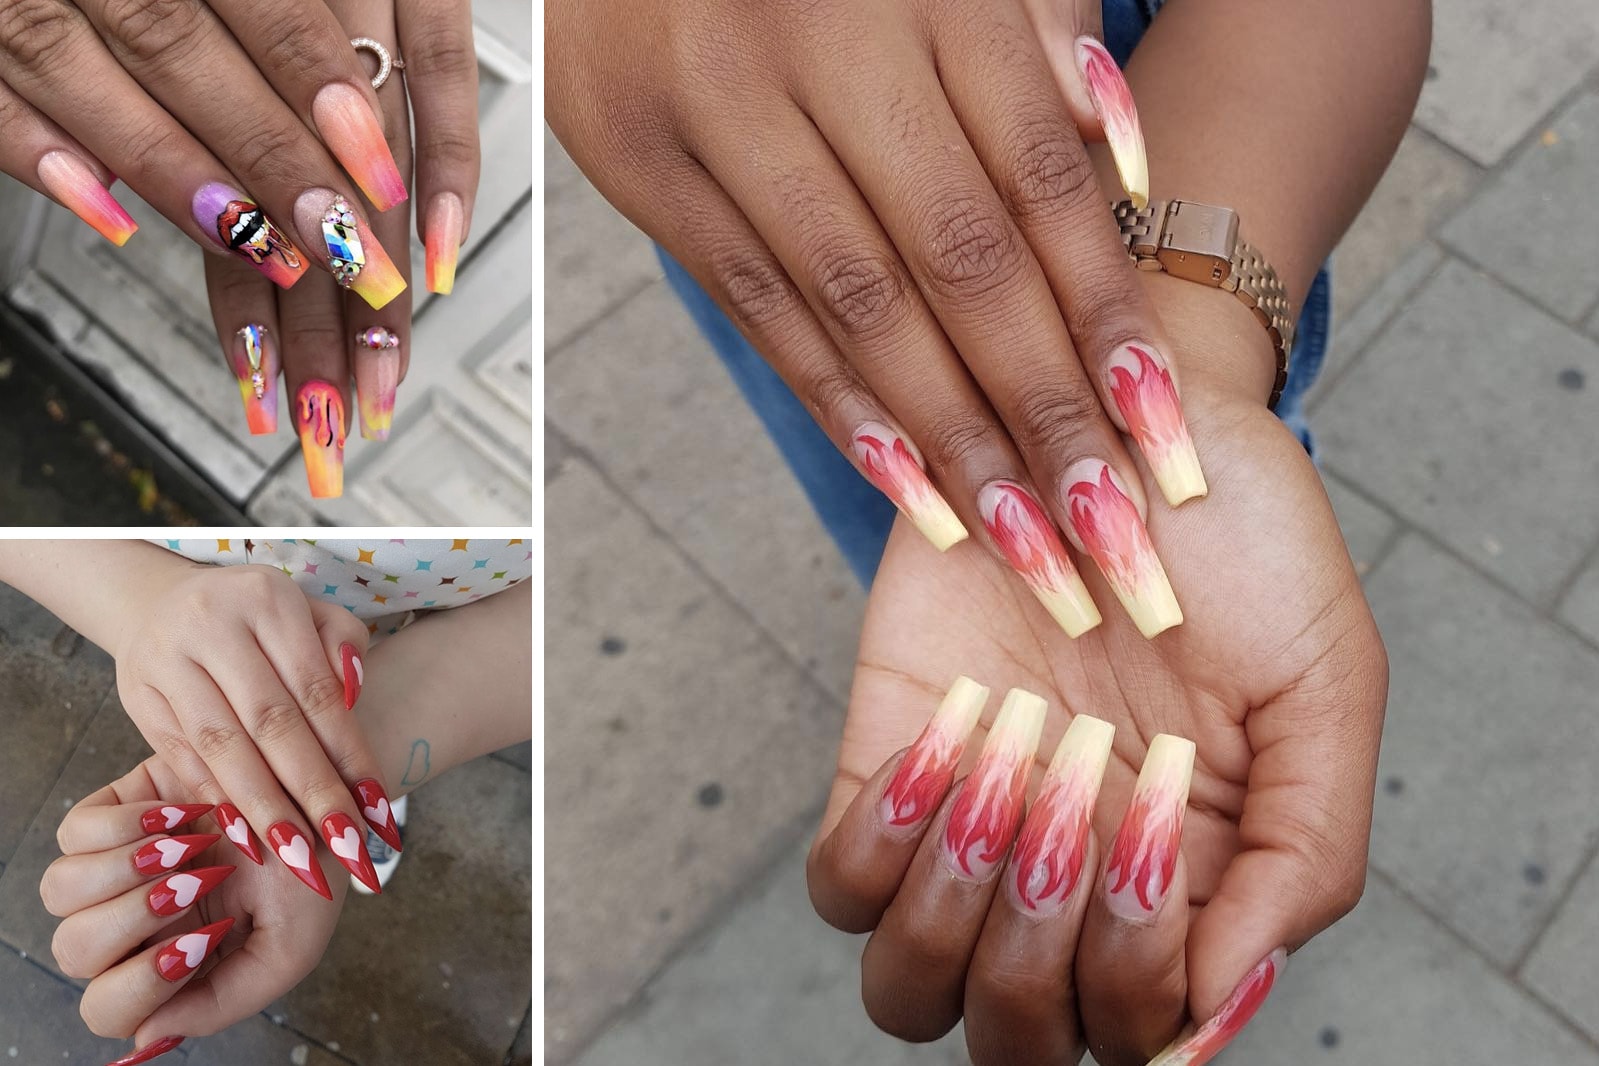 7. London's Most Instagram-Worthy Crazy Nail Art Salons - wide 2